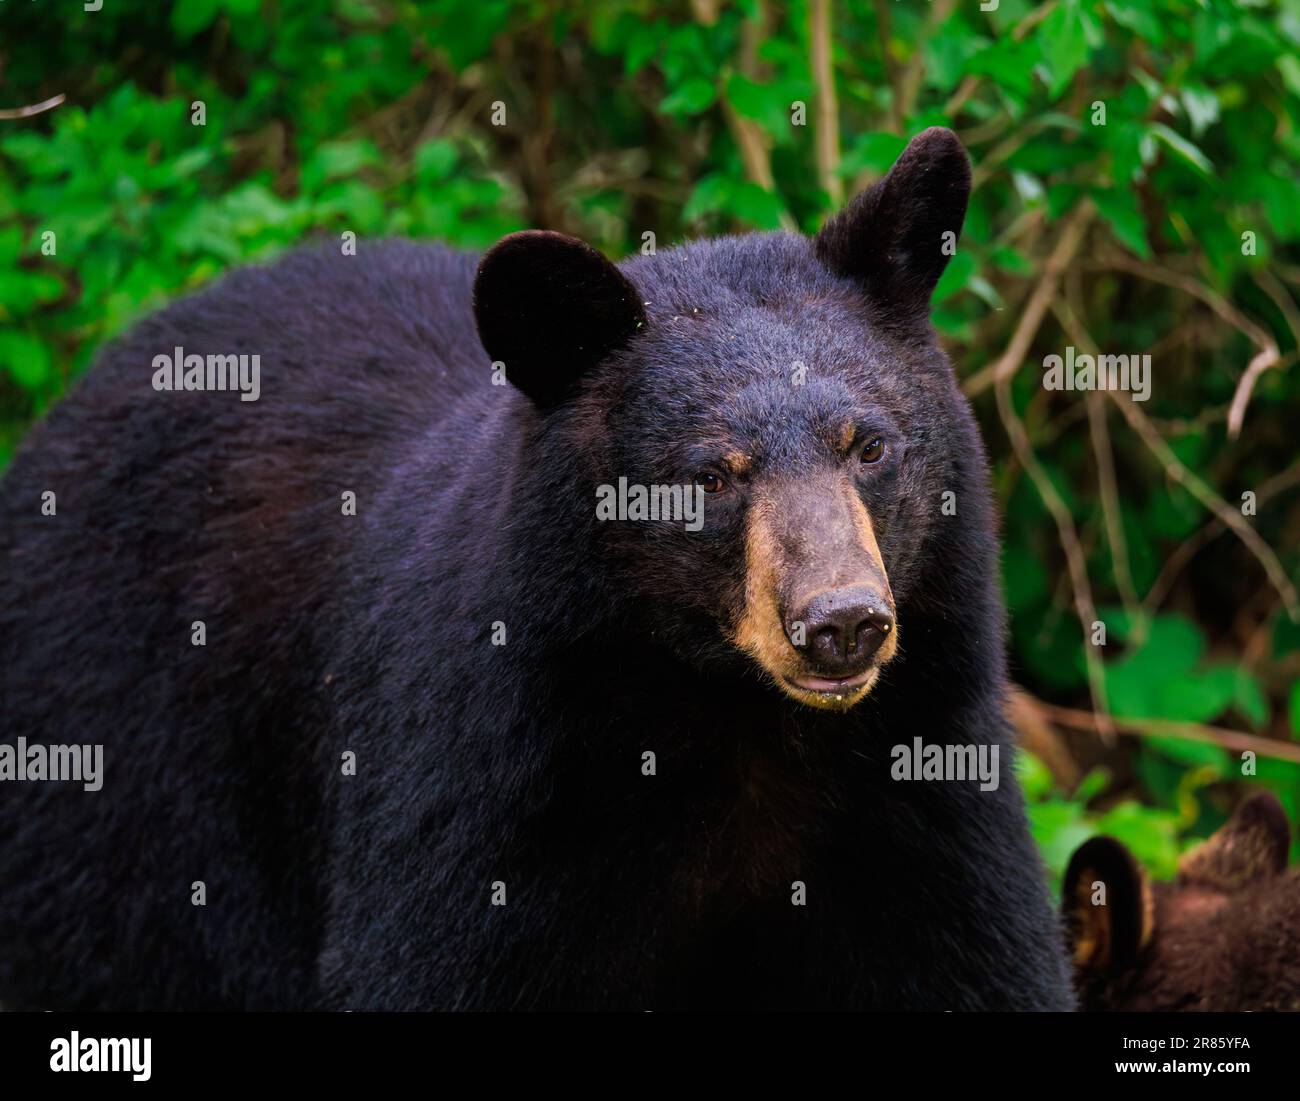 American Black Bear in New Jersey.  Mother bear and cub eating bird seed in the woods Stock Photo